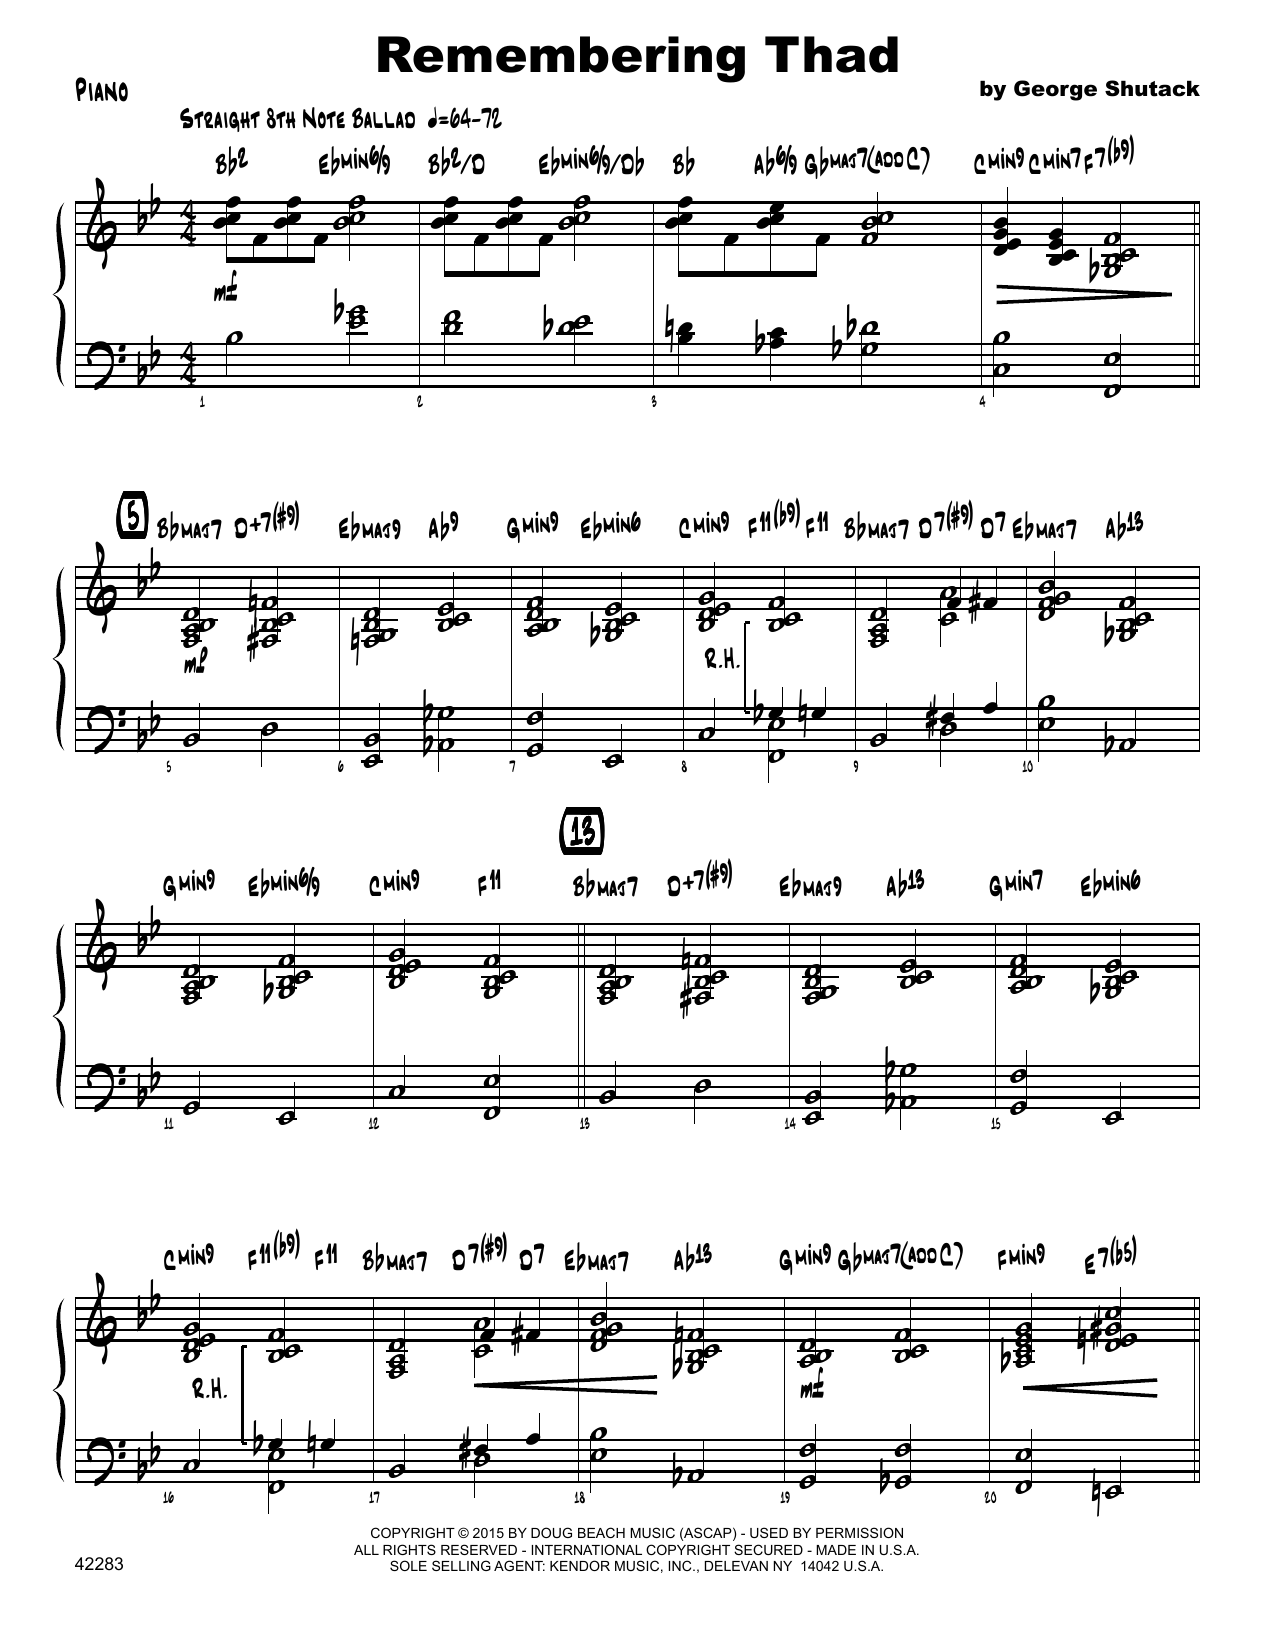 Download George Shutack Remembering Thad - Piano Sheet Music